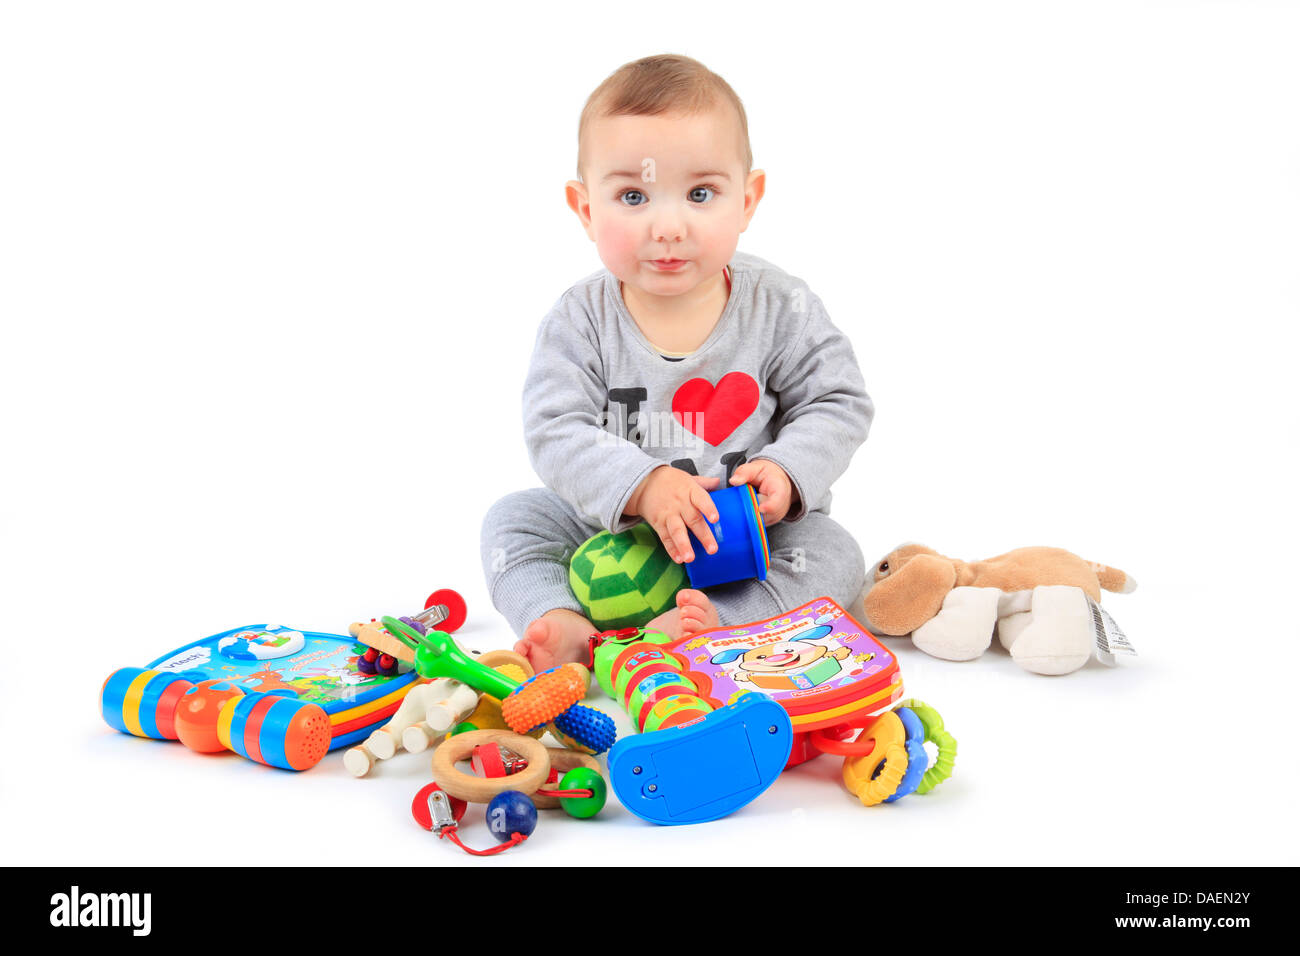 lively baby playing with playthings Stock Photo